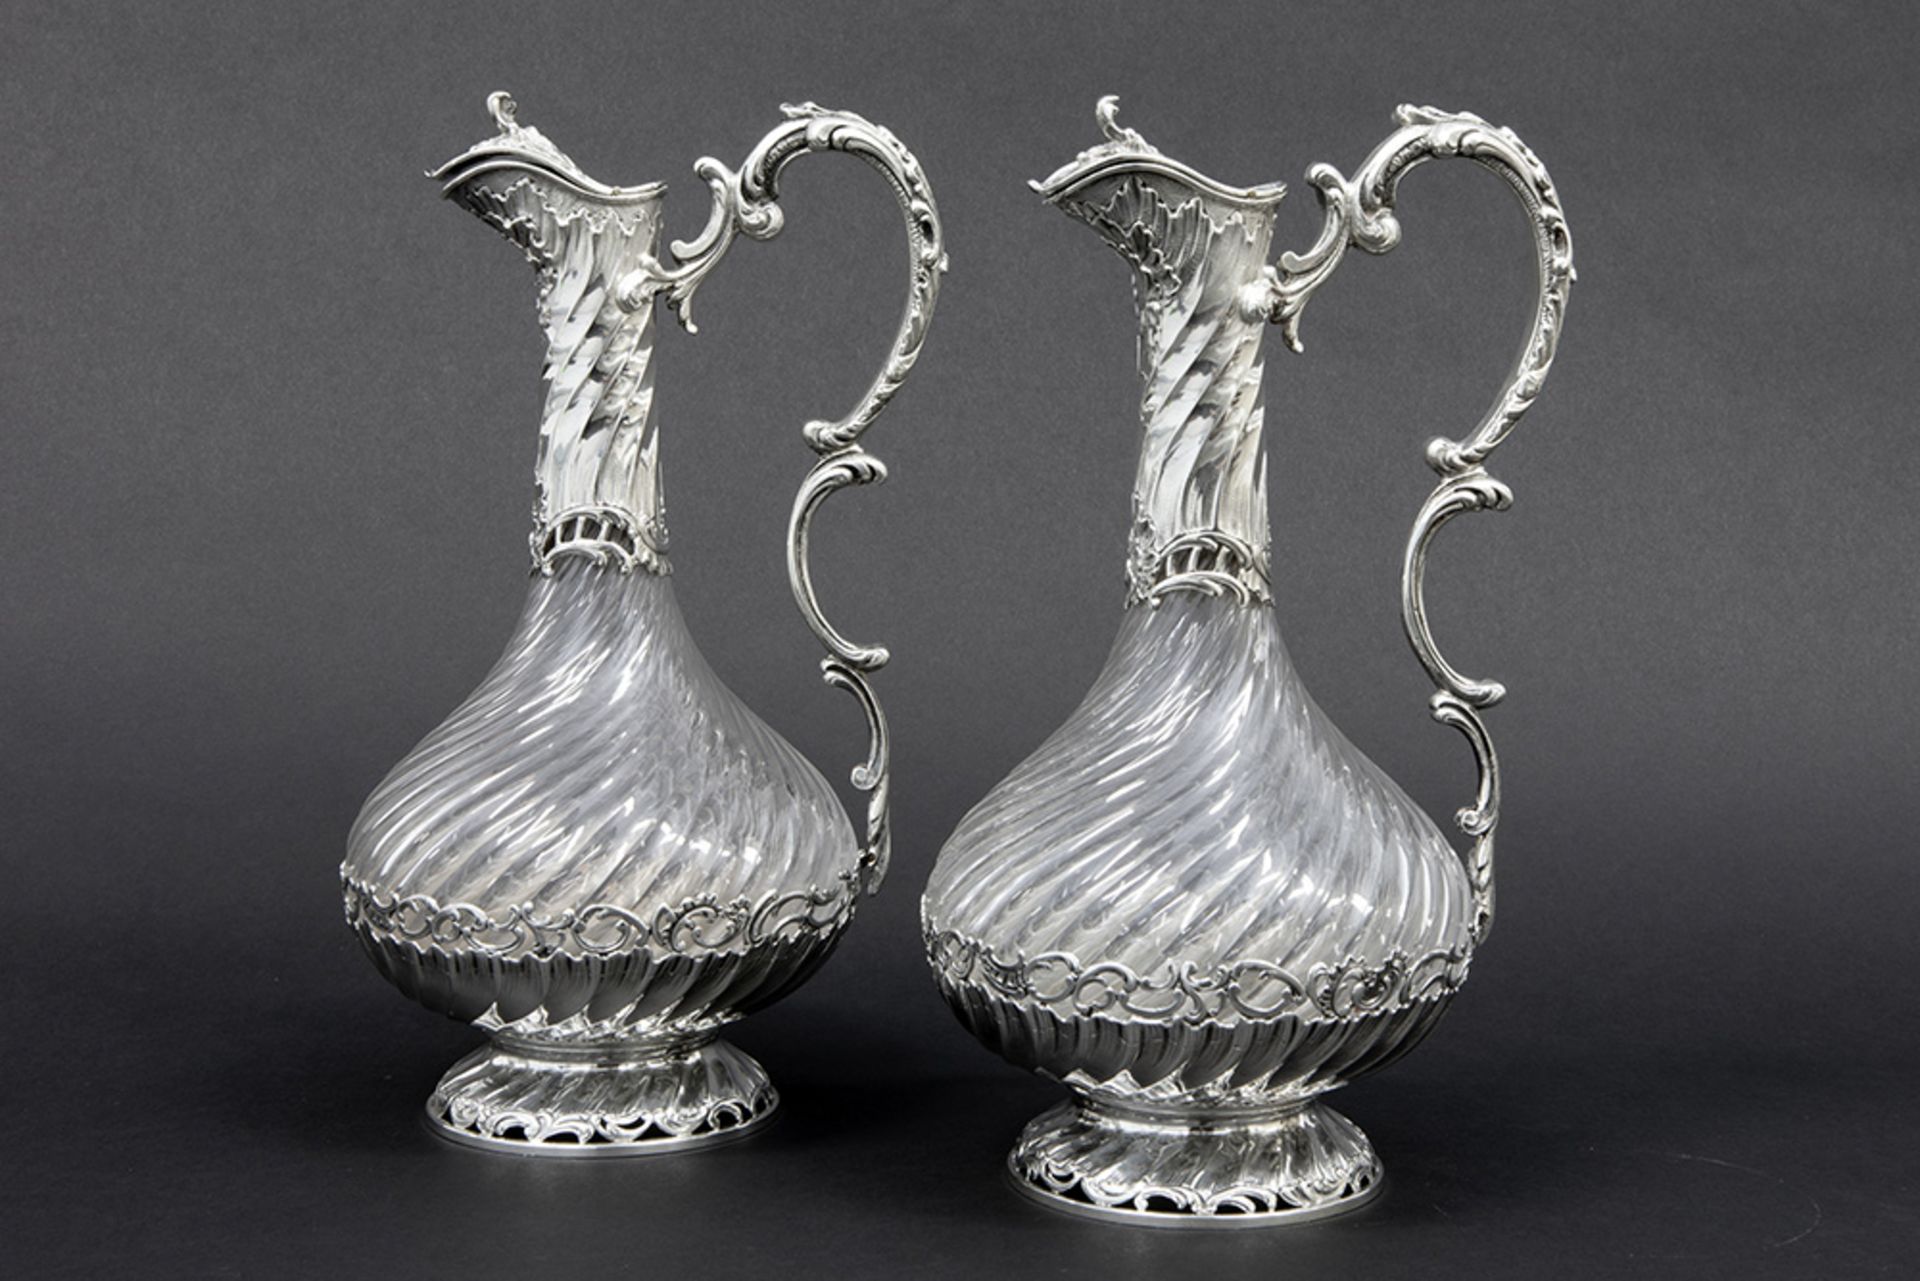 nice pair of antique French "Hector Alfred" signed decanters/claret jugs in clear glass and marked